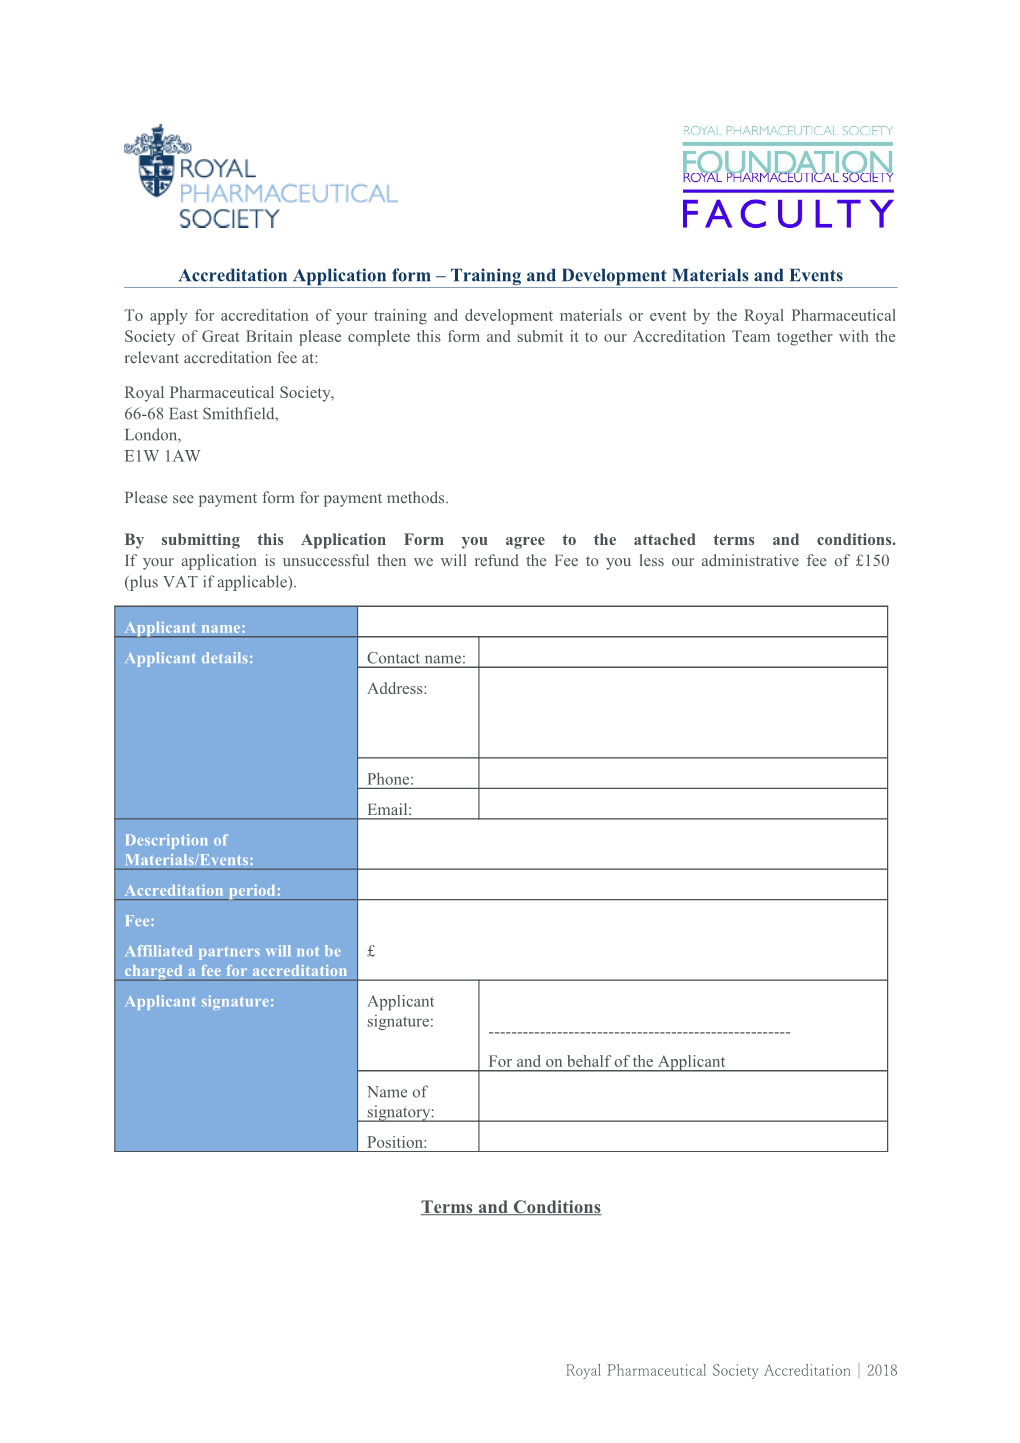 Accreditation Application Form Training and Development Materials and Events